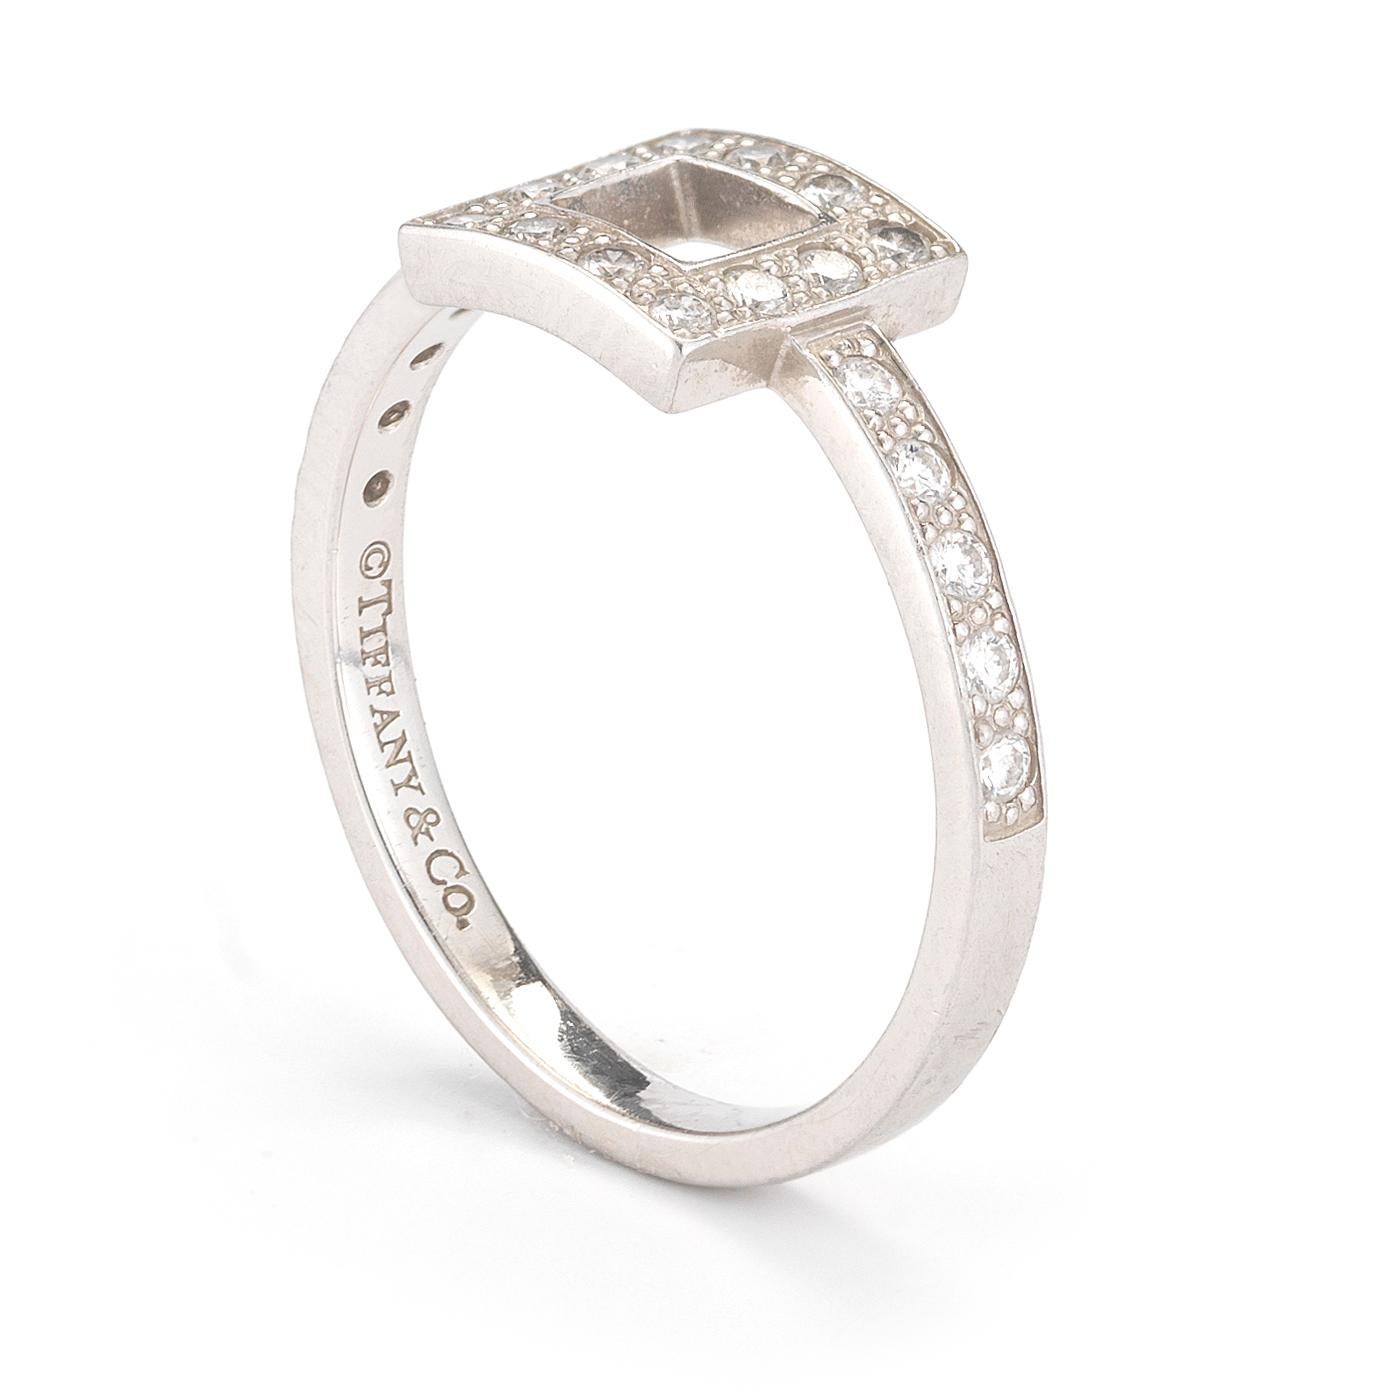 A dainty cutout square motif is accented with round diamonds totaling approximately 0.27ct mounted in platinum, signed Tiffany & Co. Ring size 6. The square motif measures approximately 7.5 x 8mm.